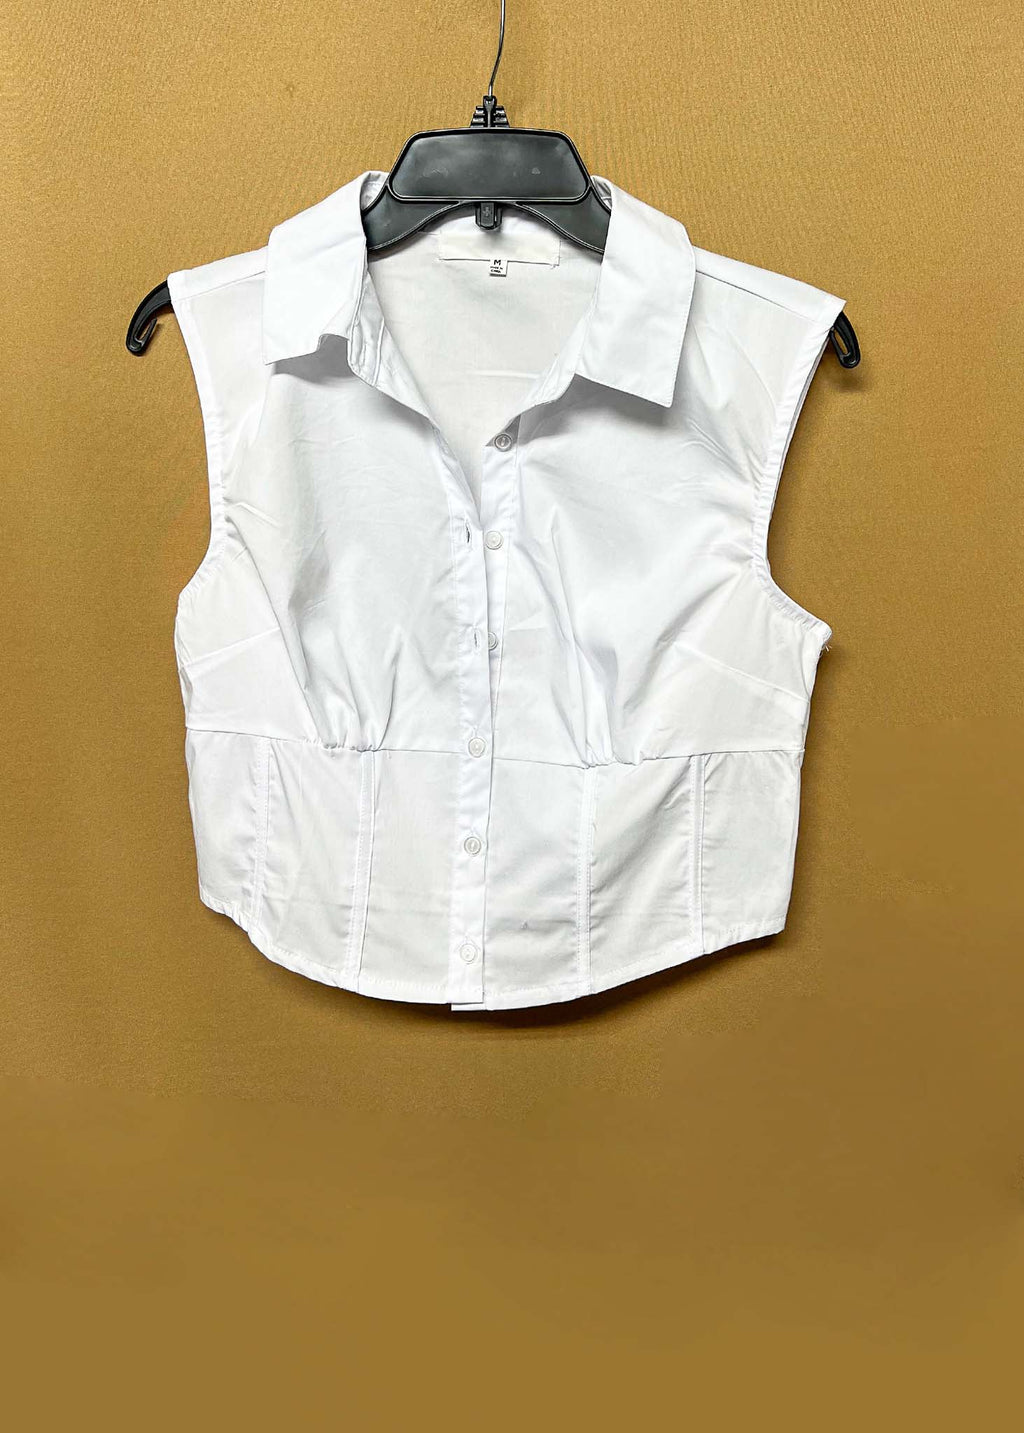 Women's Sleeveless Collared Button Down Solid Crop Top